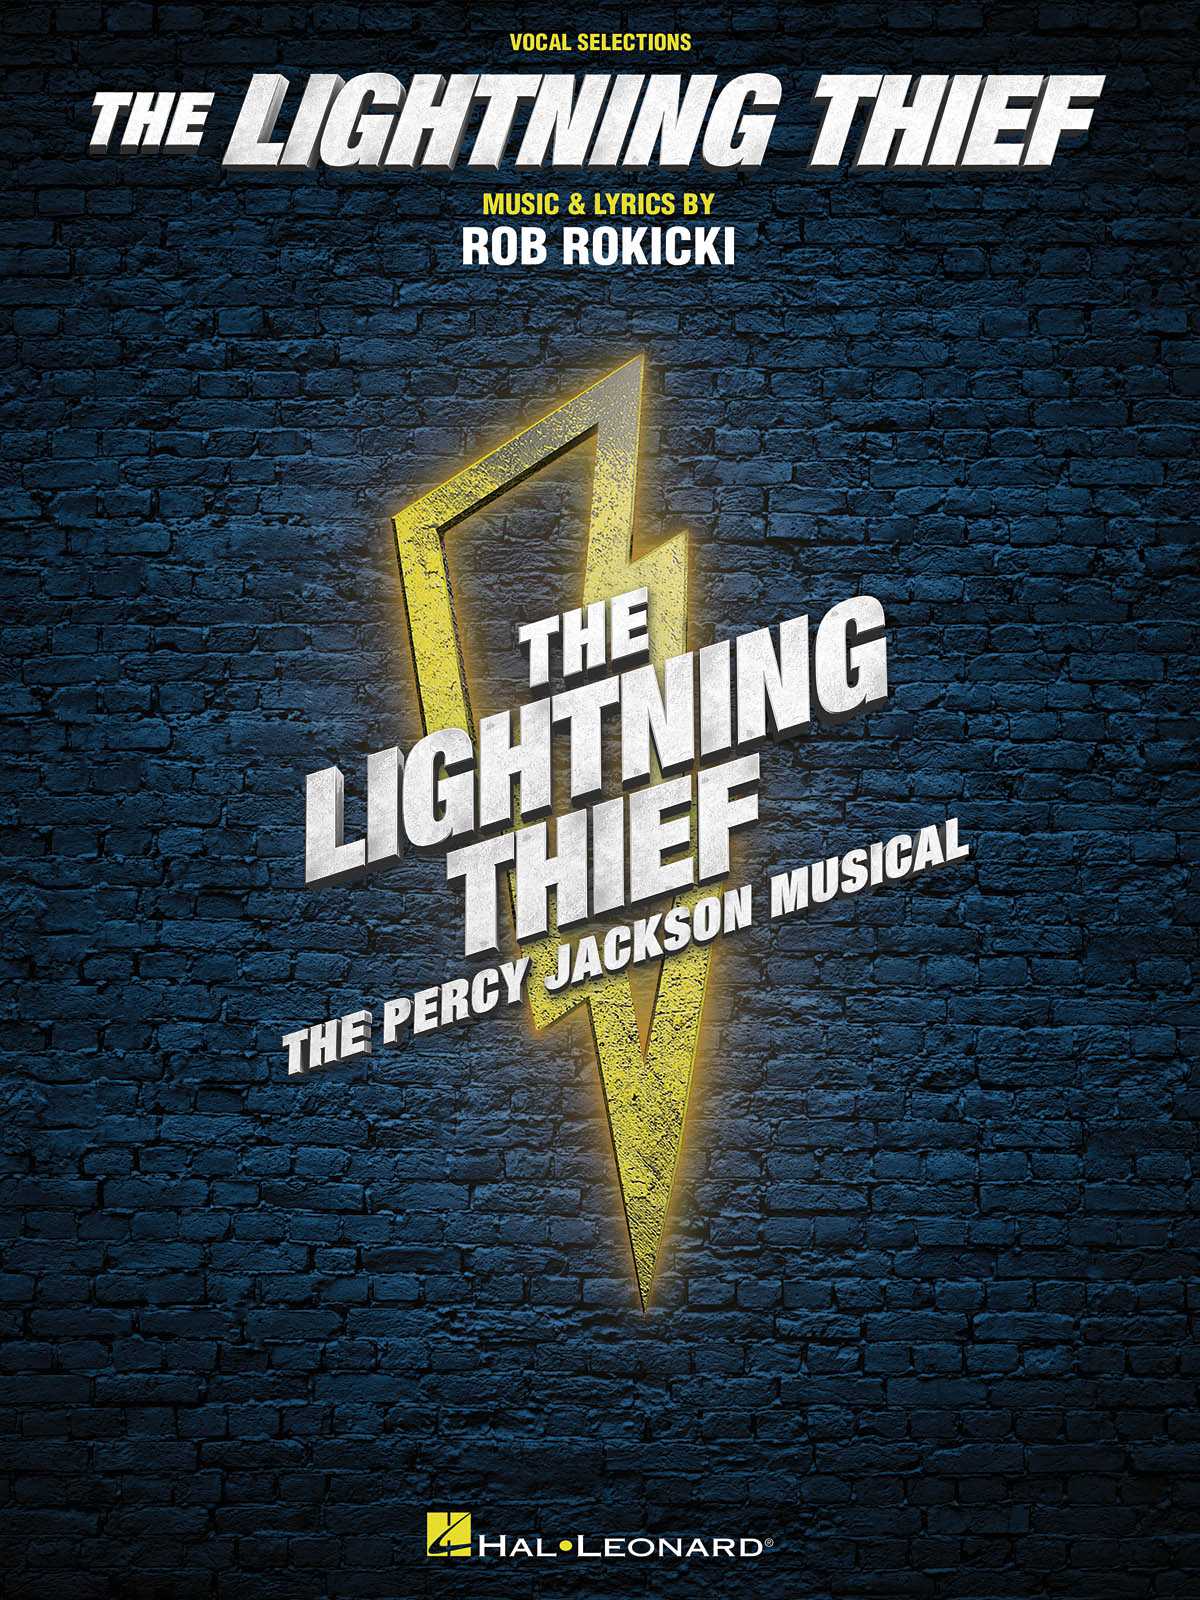 The Lightning Thief The Percy Jackson Musical - Vocal Selections